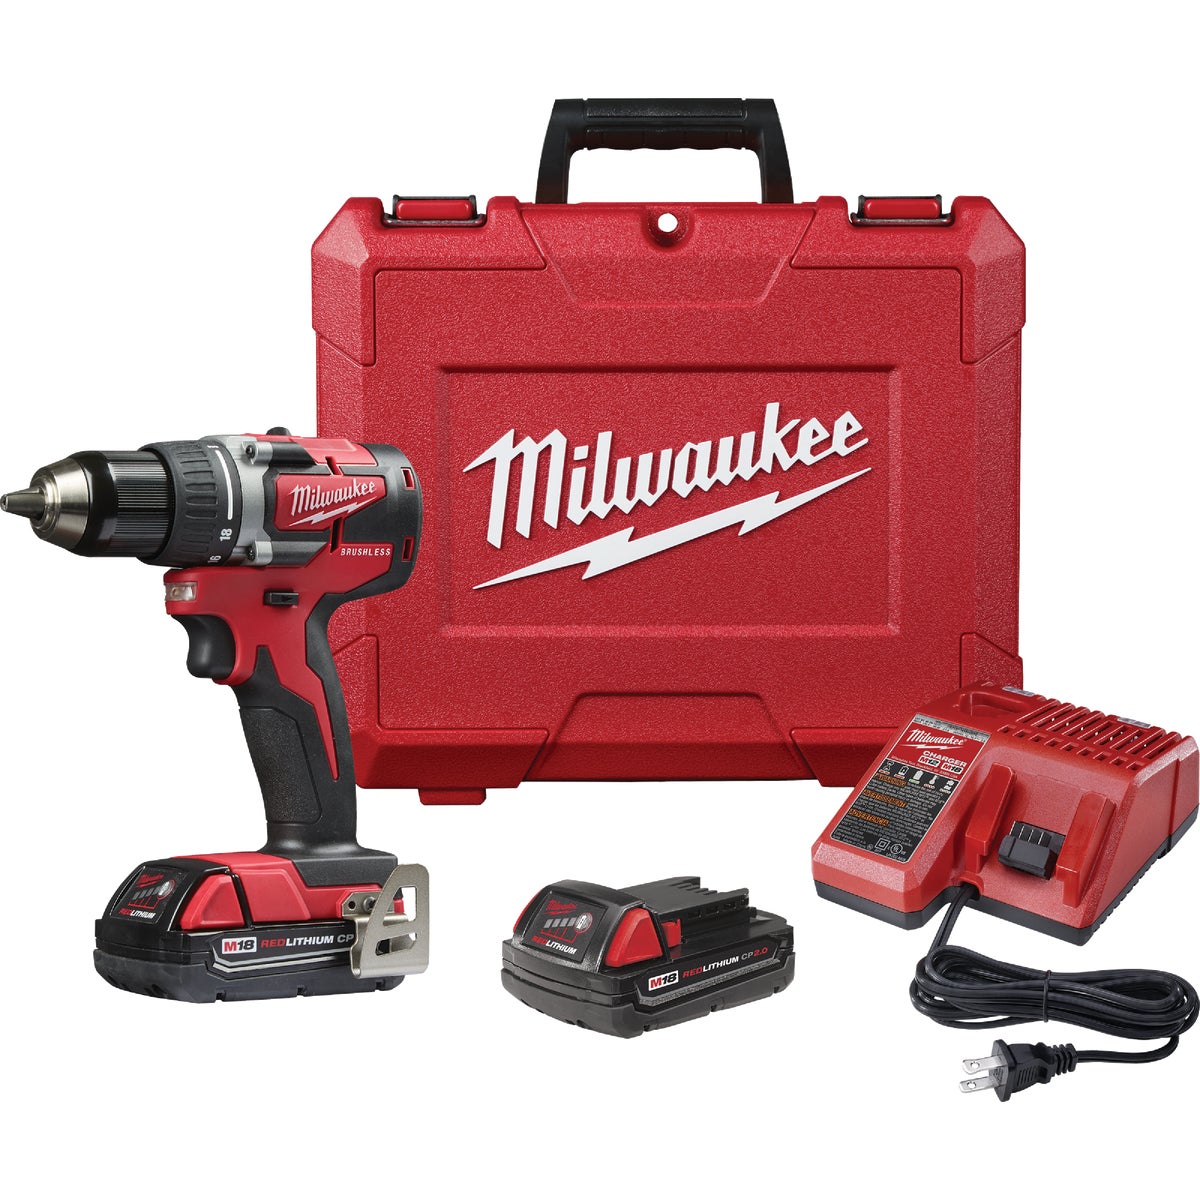 Item 304020, The MILWAUKEE M18  Compact Brushless Drill/Driver is more compact with 